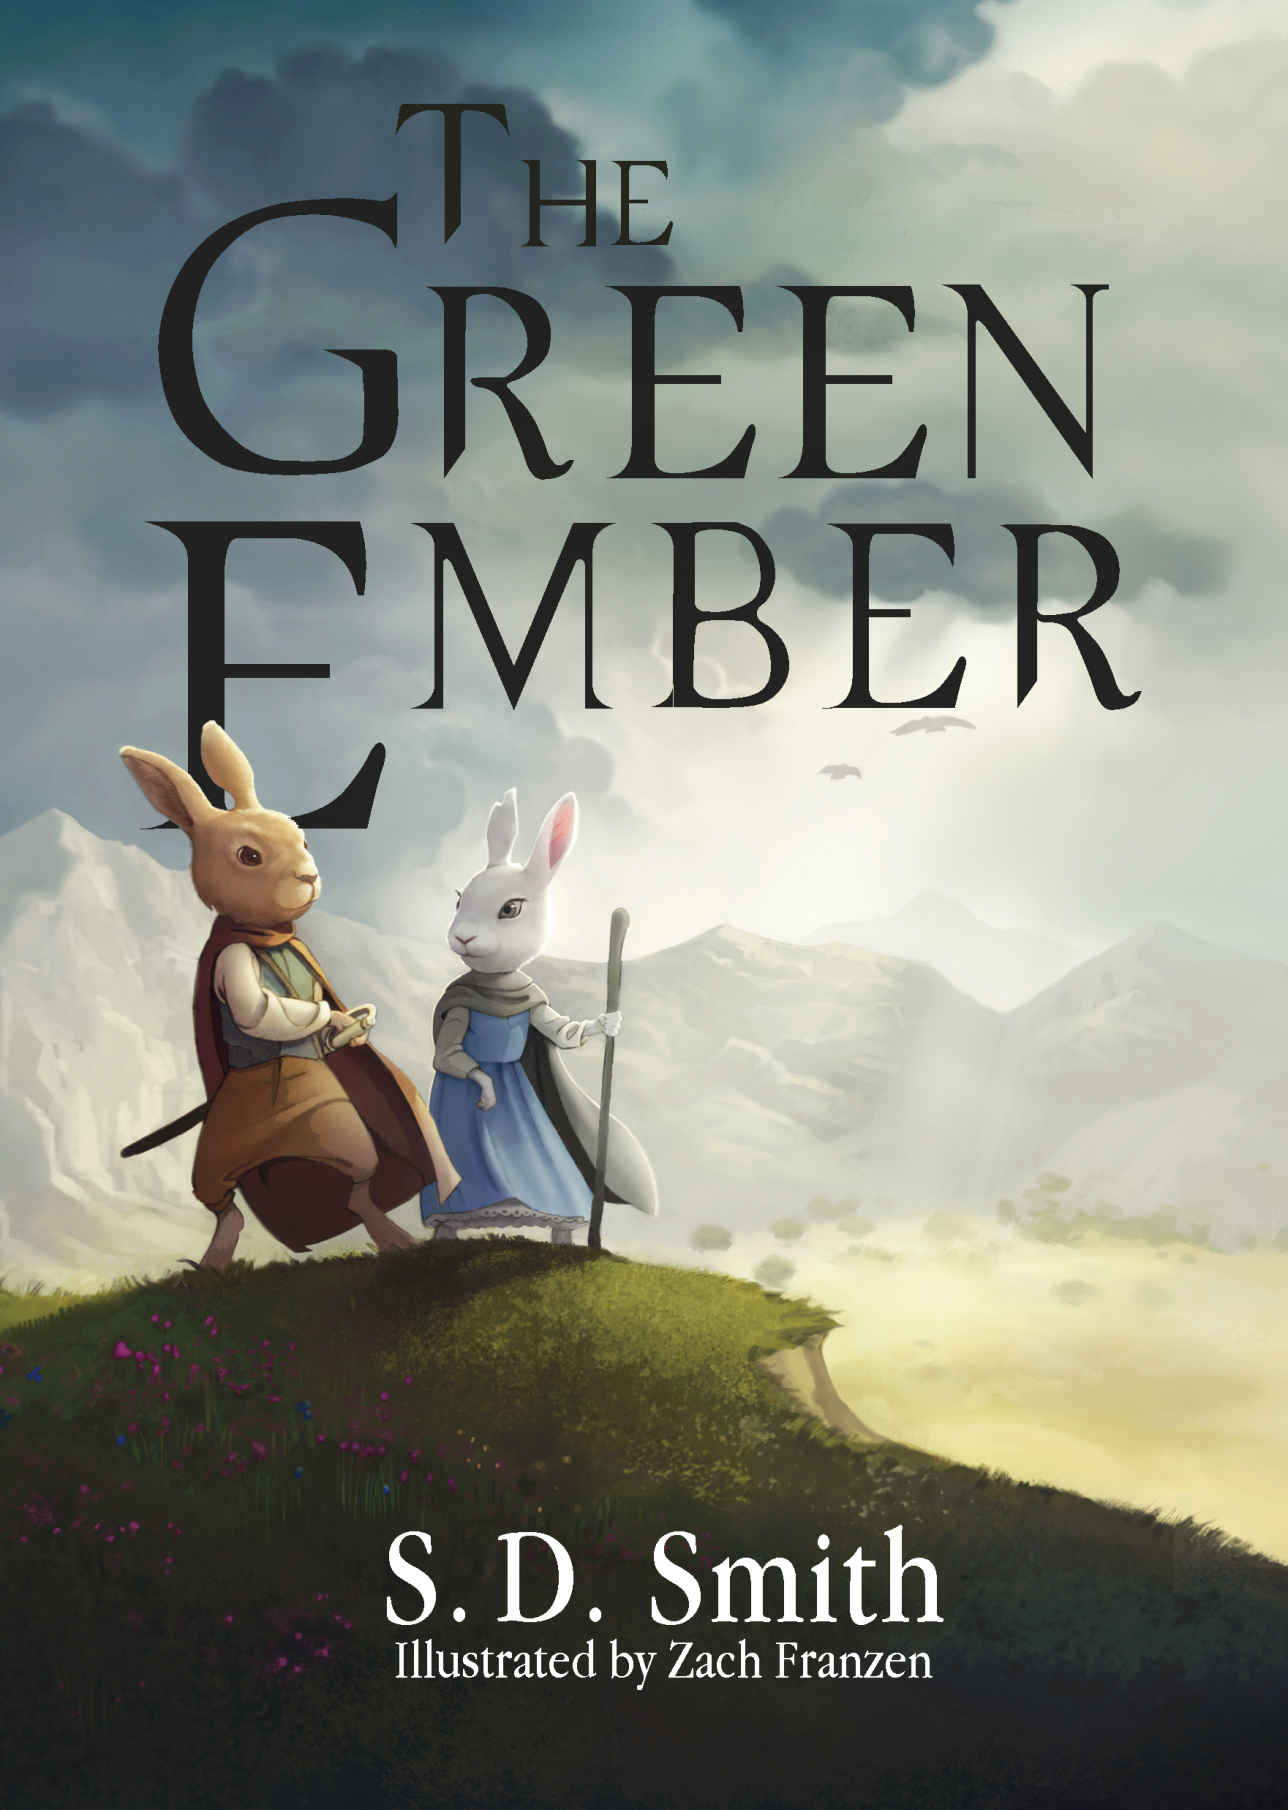 ember and greens